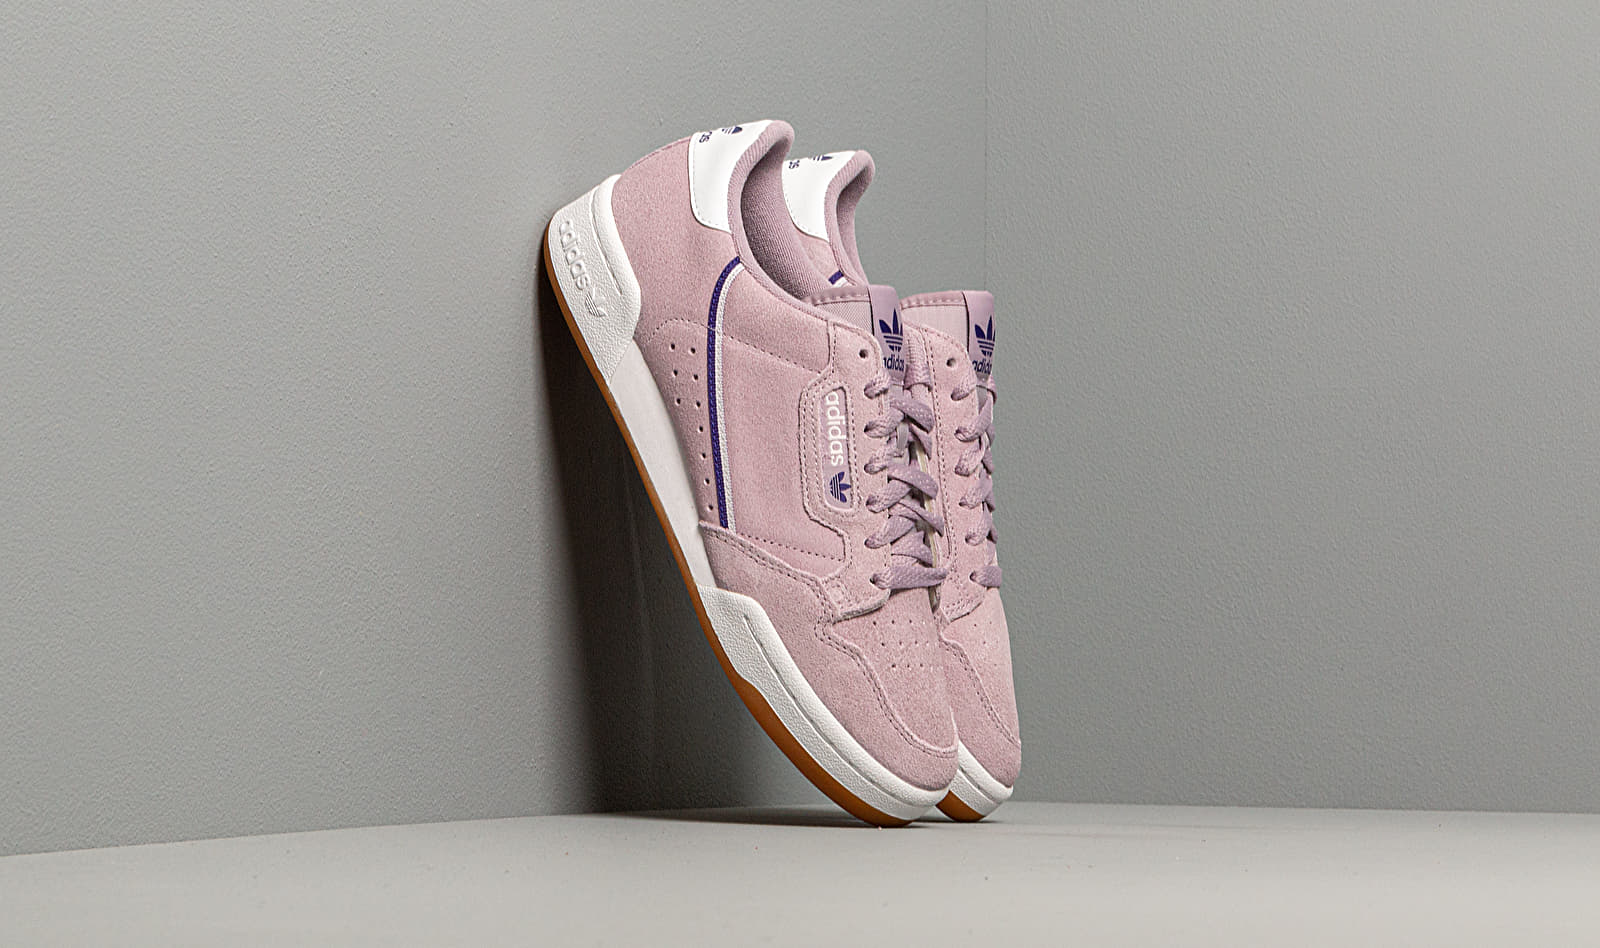 adidas Continental 80 W Soft Vision/ Core Purple/ Orchid Tint